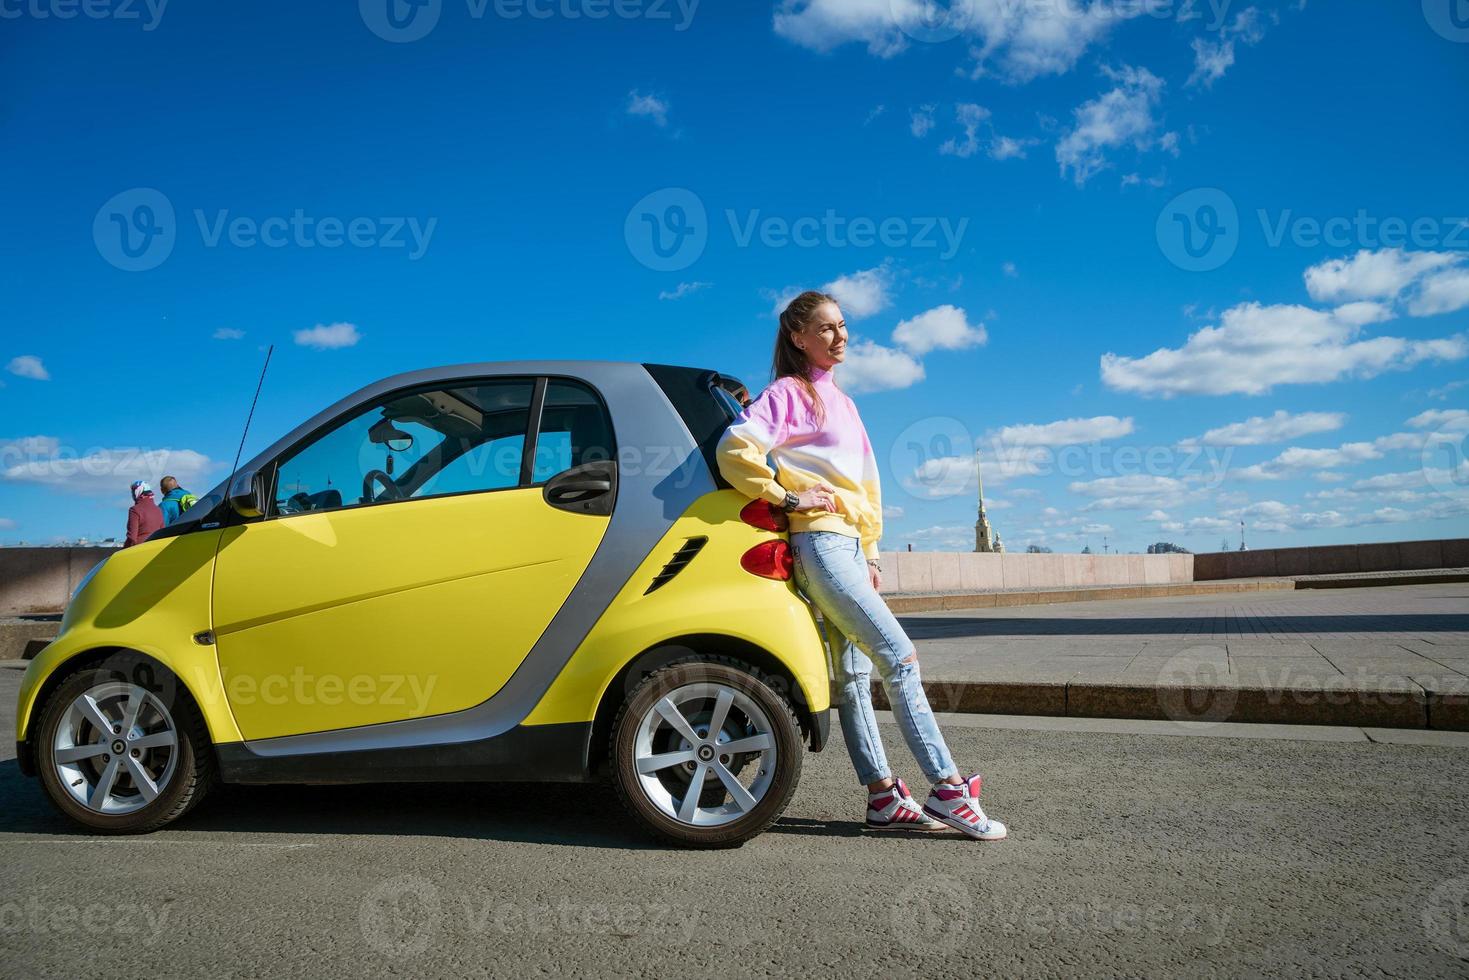 12.04.2019 Russia Saint Petersburg. A young happy woman stands by a smart fortwo car against a blue sky with clouds photo